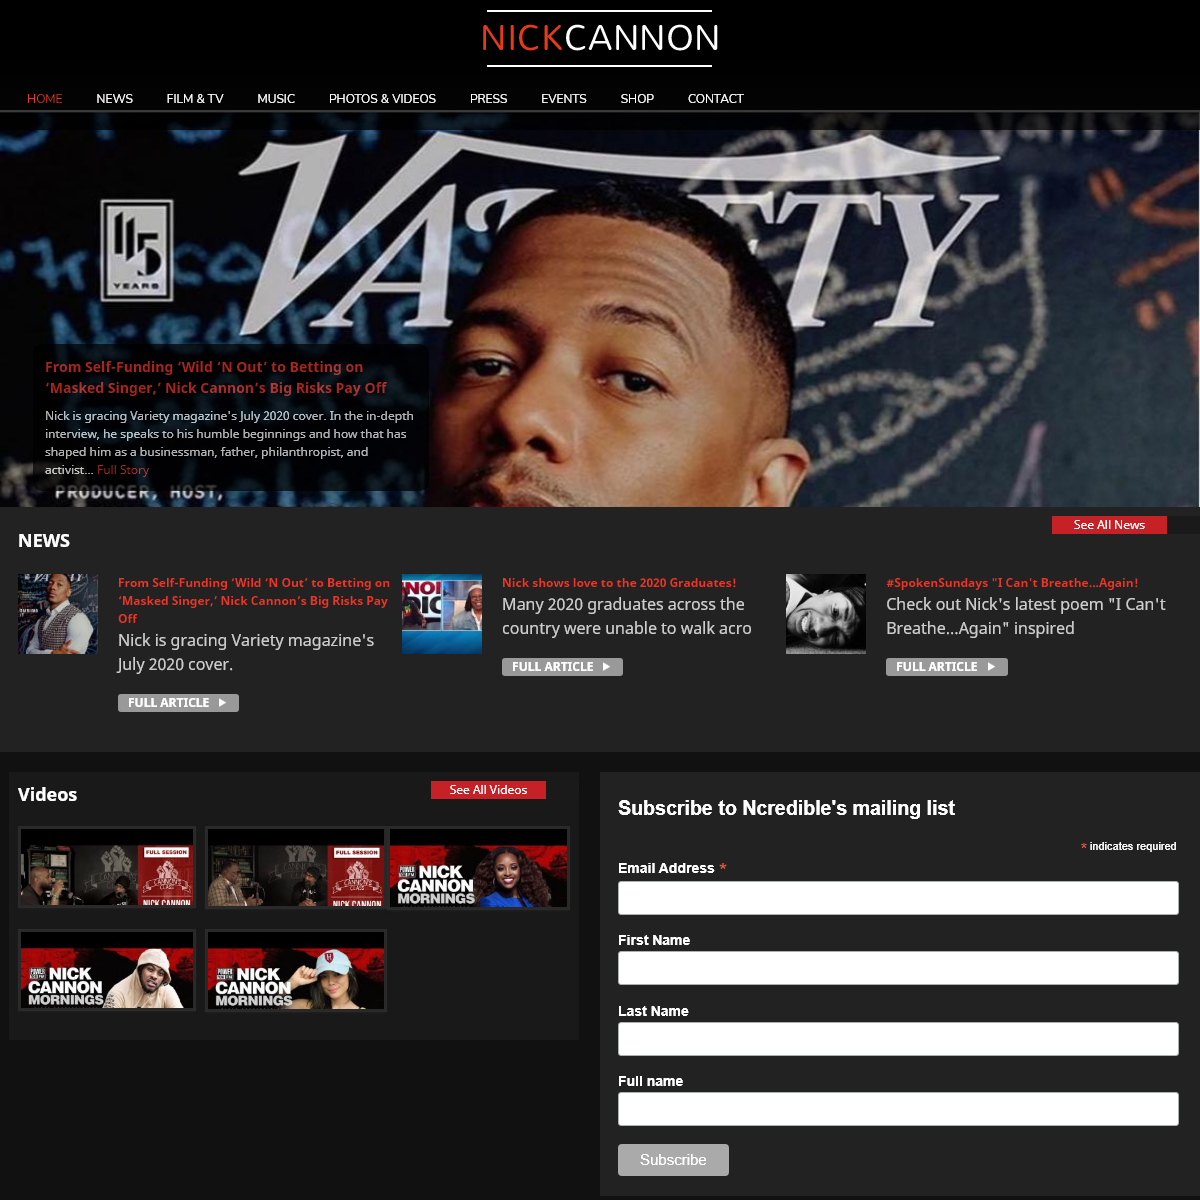 A complete backup of nickcannon.com